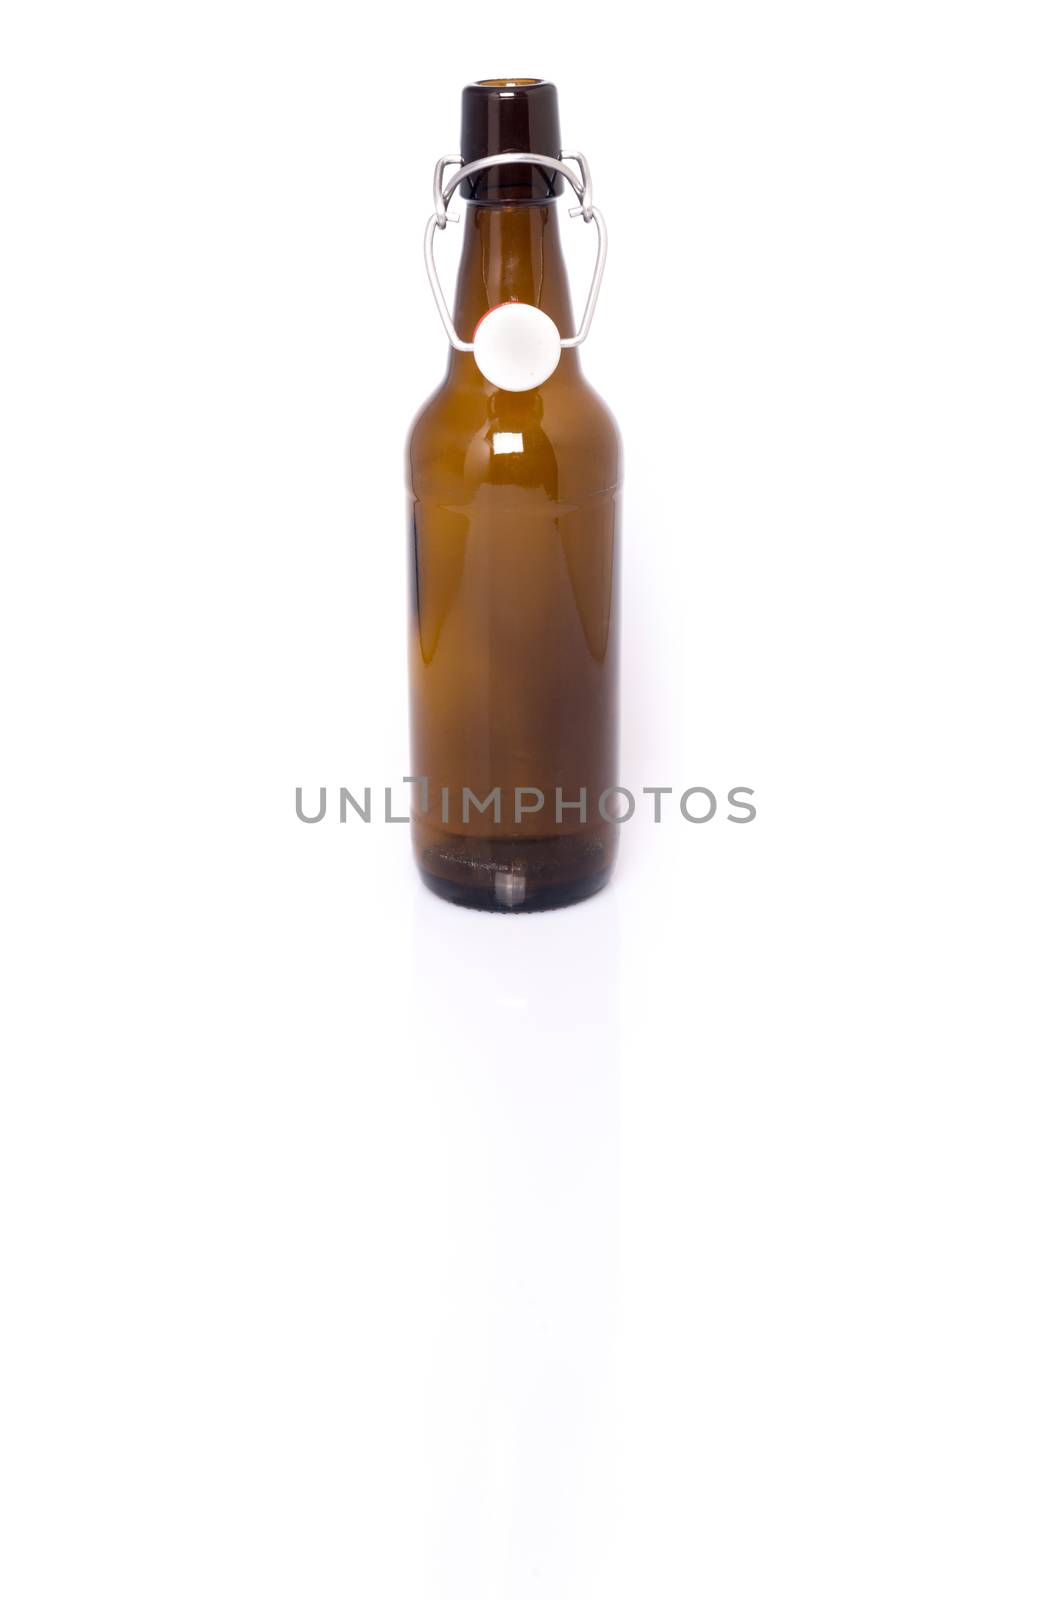 Old brown bottle of beer isolated on white. by franky242